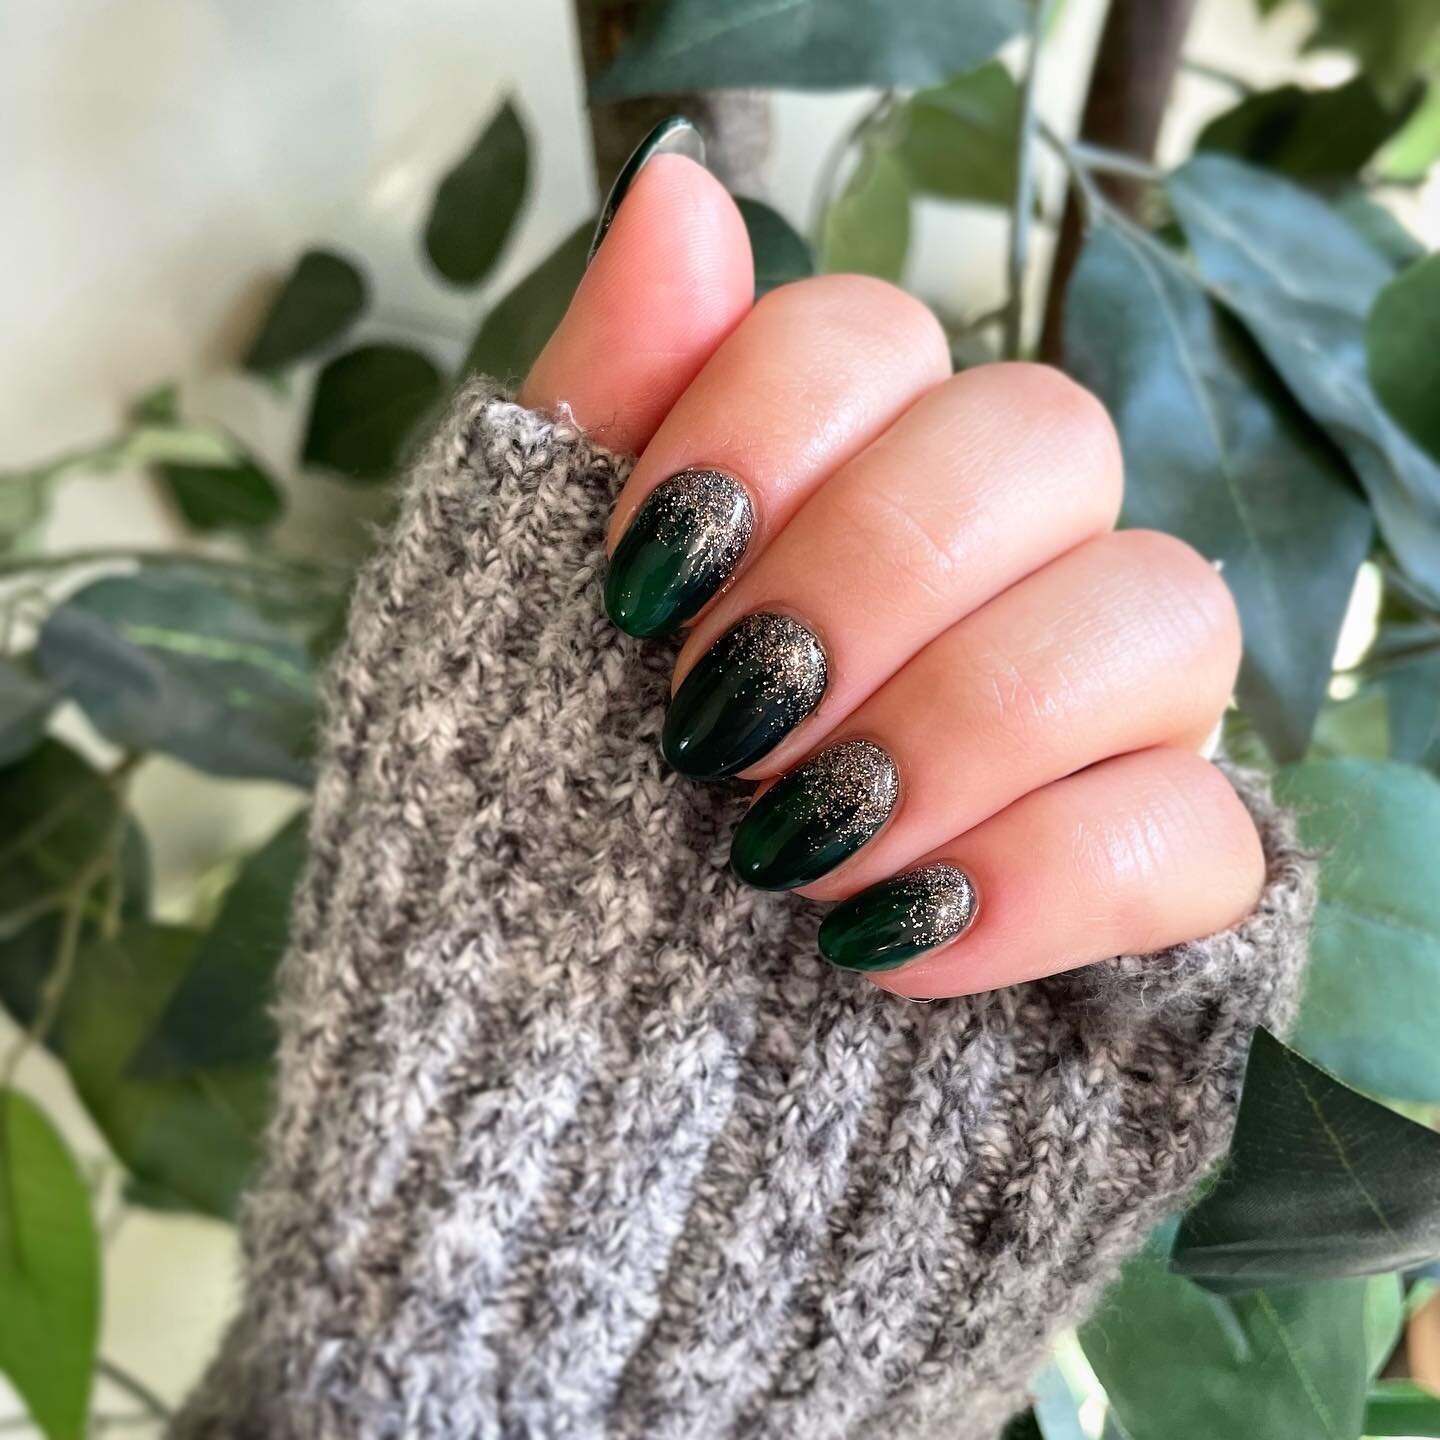 Manicure by @styled_by_kristenmarie 💚
There is still time to book your holiday manicure🎄
&bull;
&bull;
#hudsonvalley #hudsonvalleyny #nailsofinstagram #nails #nailart #halloweennails #halloween #newwindsor #newwindsornails #hudsonvalleynails #hudso